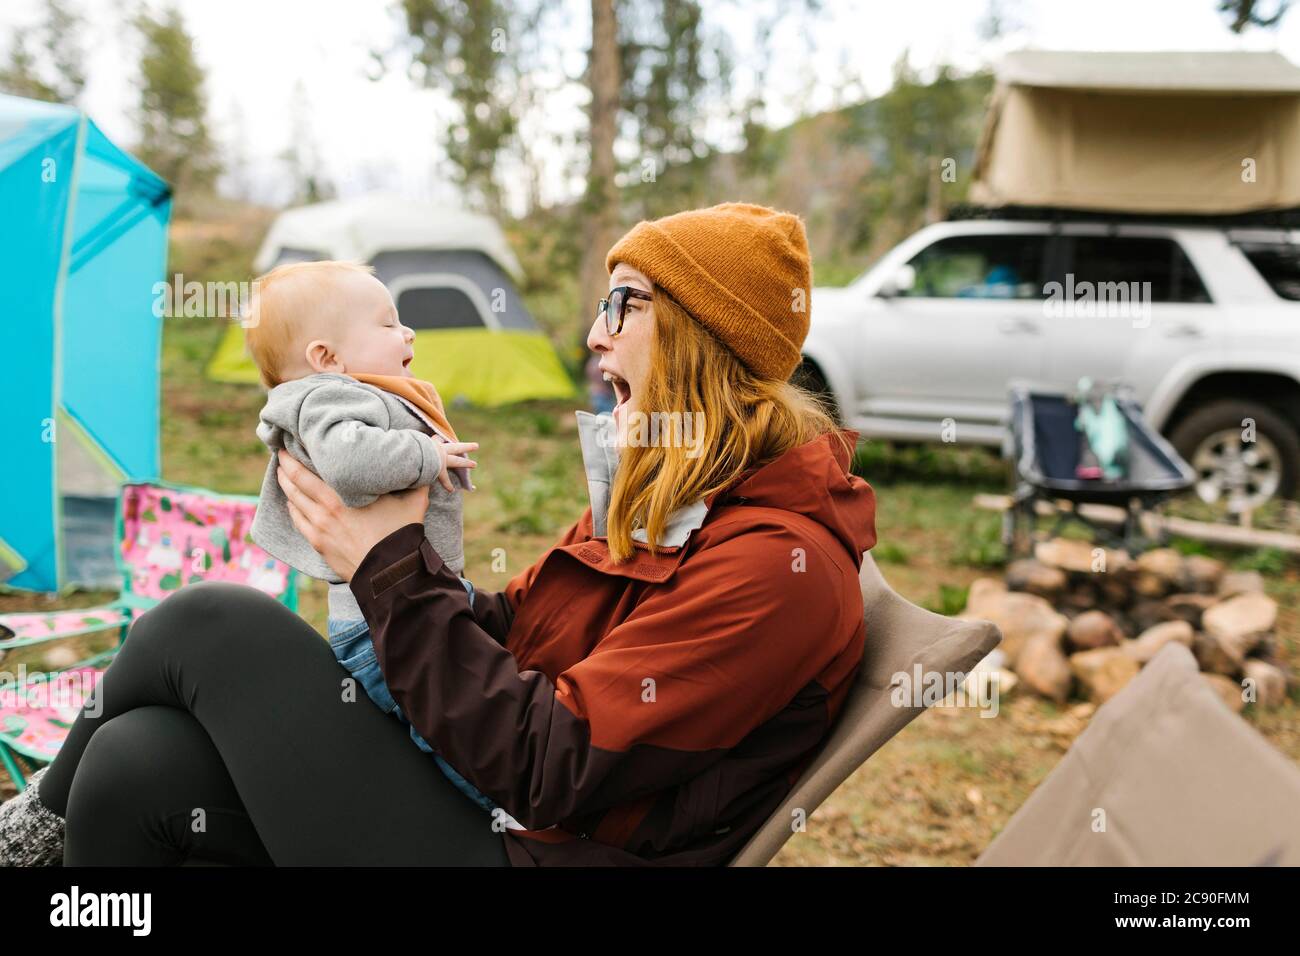 USA, Utah, Uninta Wasatch Cache National Forest, Mother holding son (6-11 months) on campsite Stock Photo